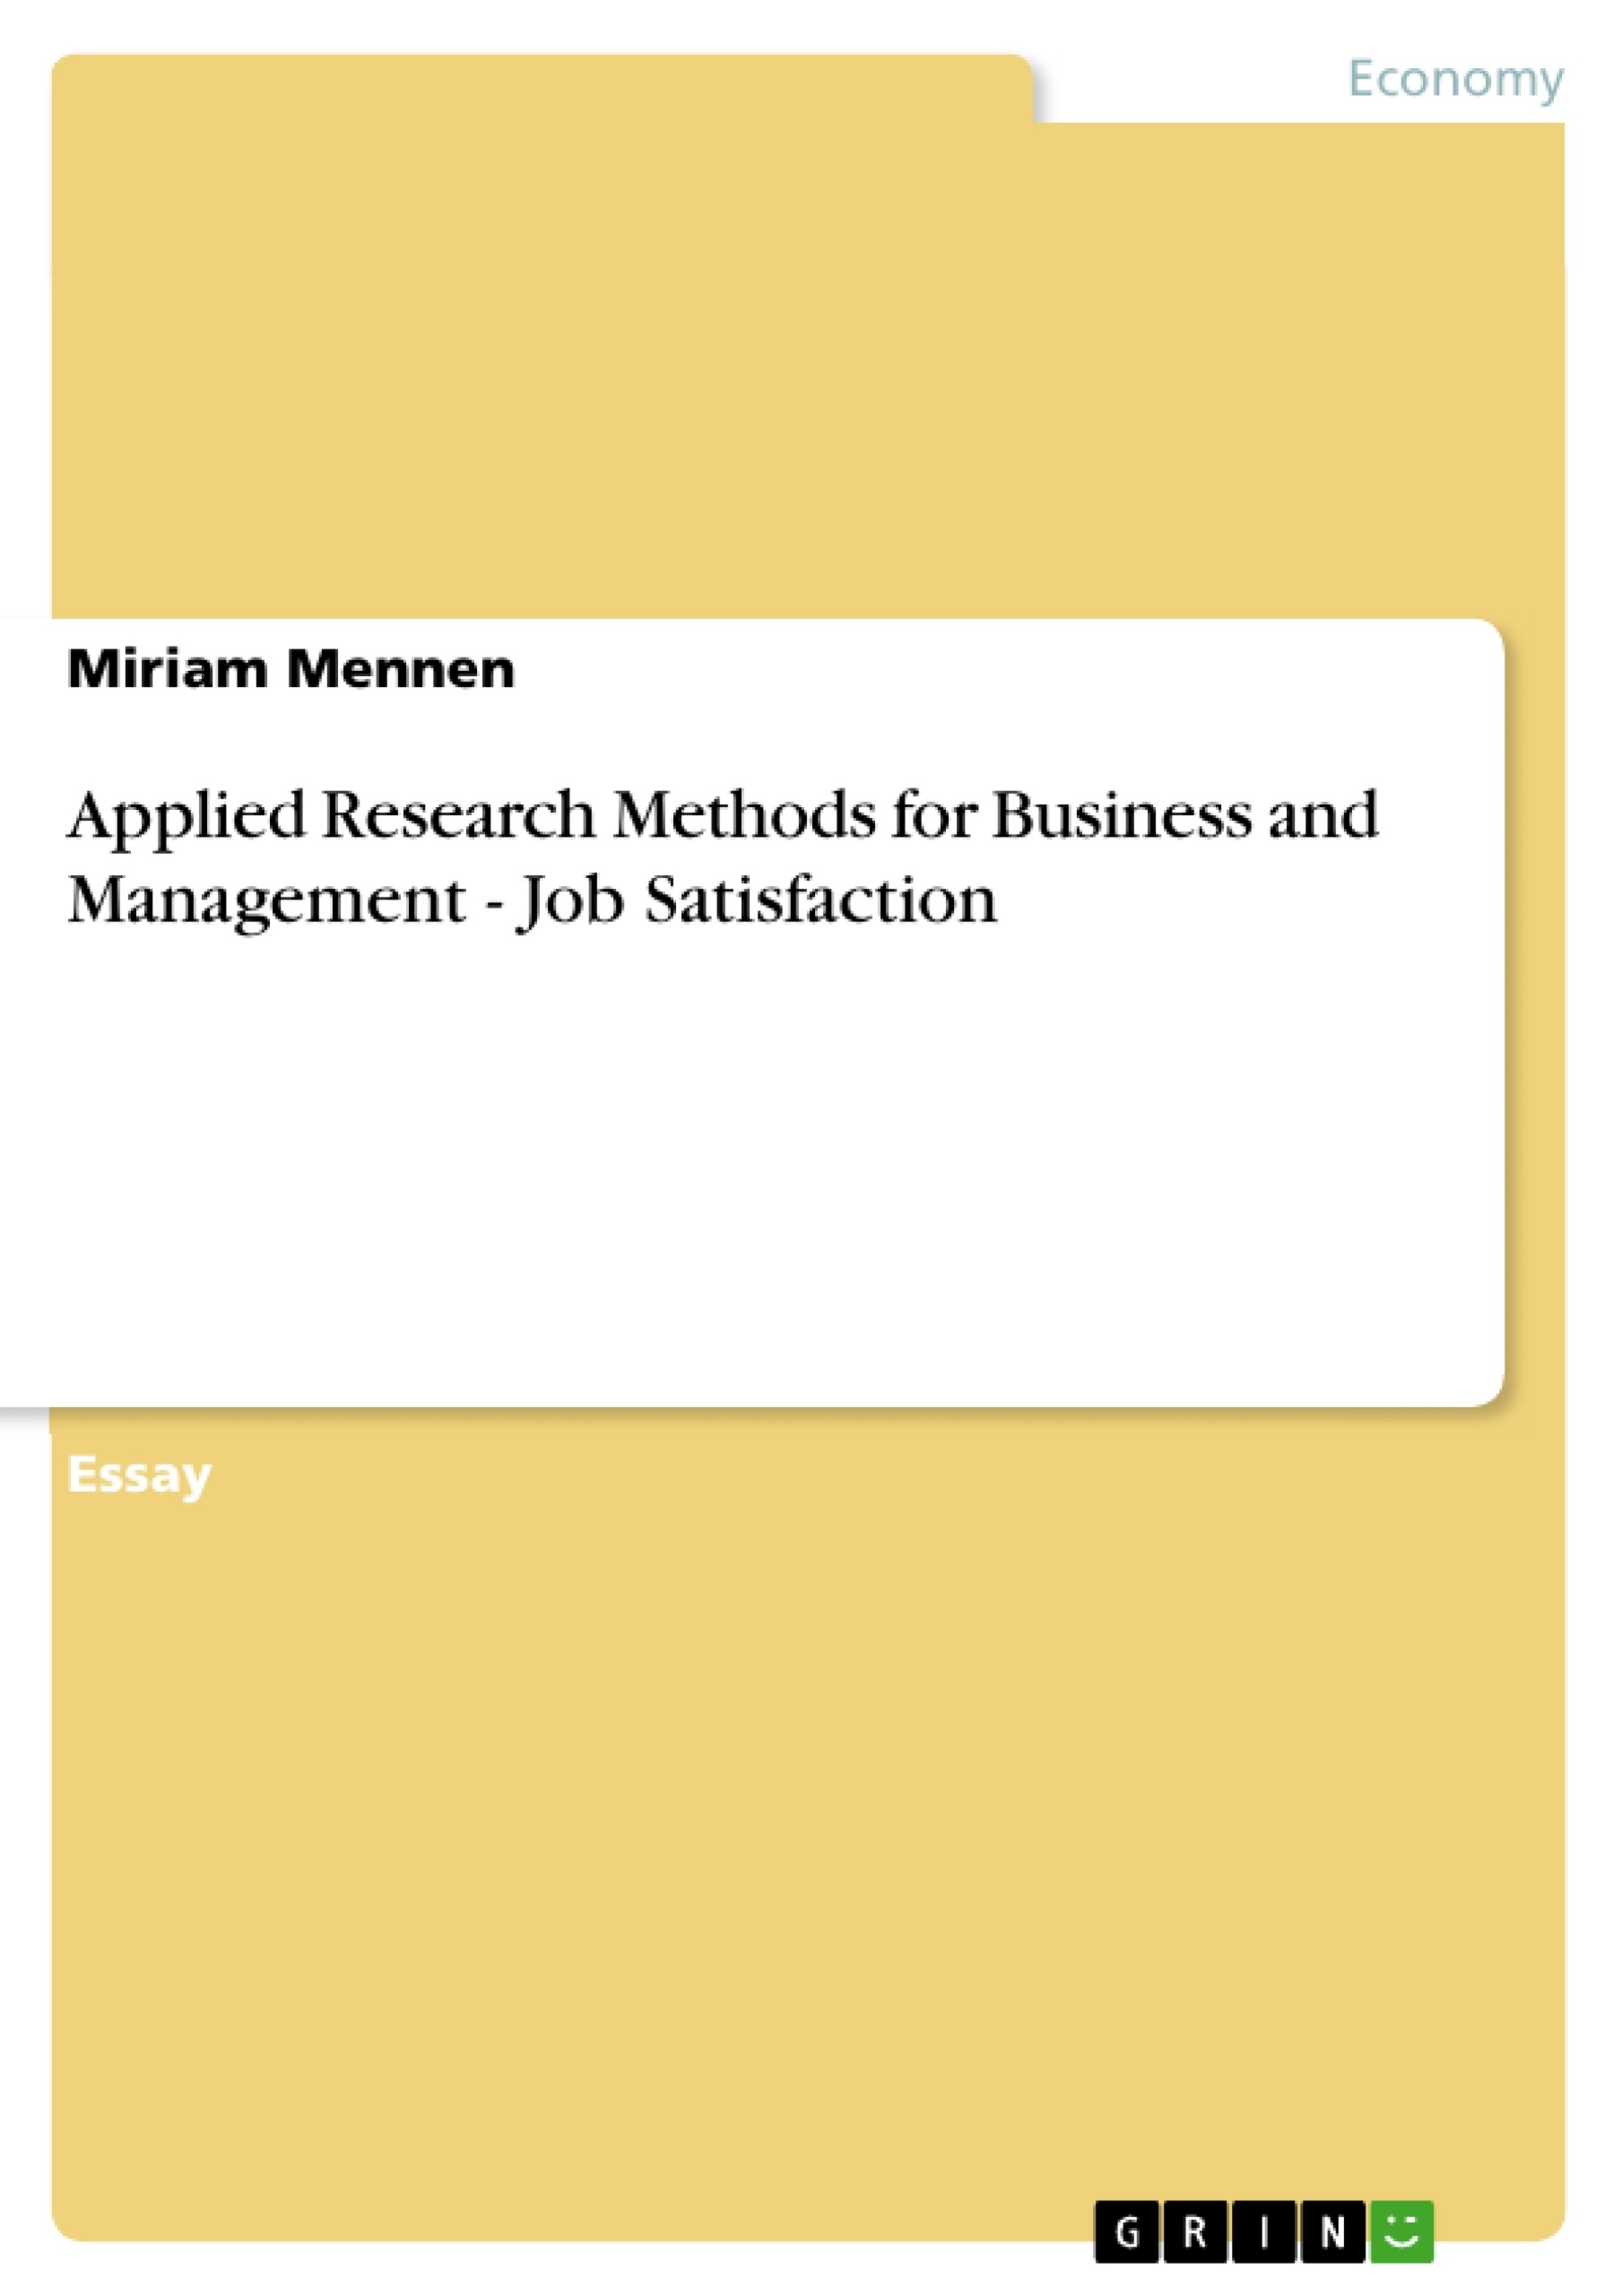 Titre: Applied Research Methods for Business and Management - Job Satisfaction